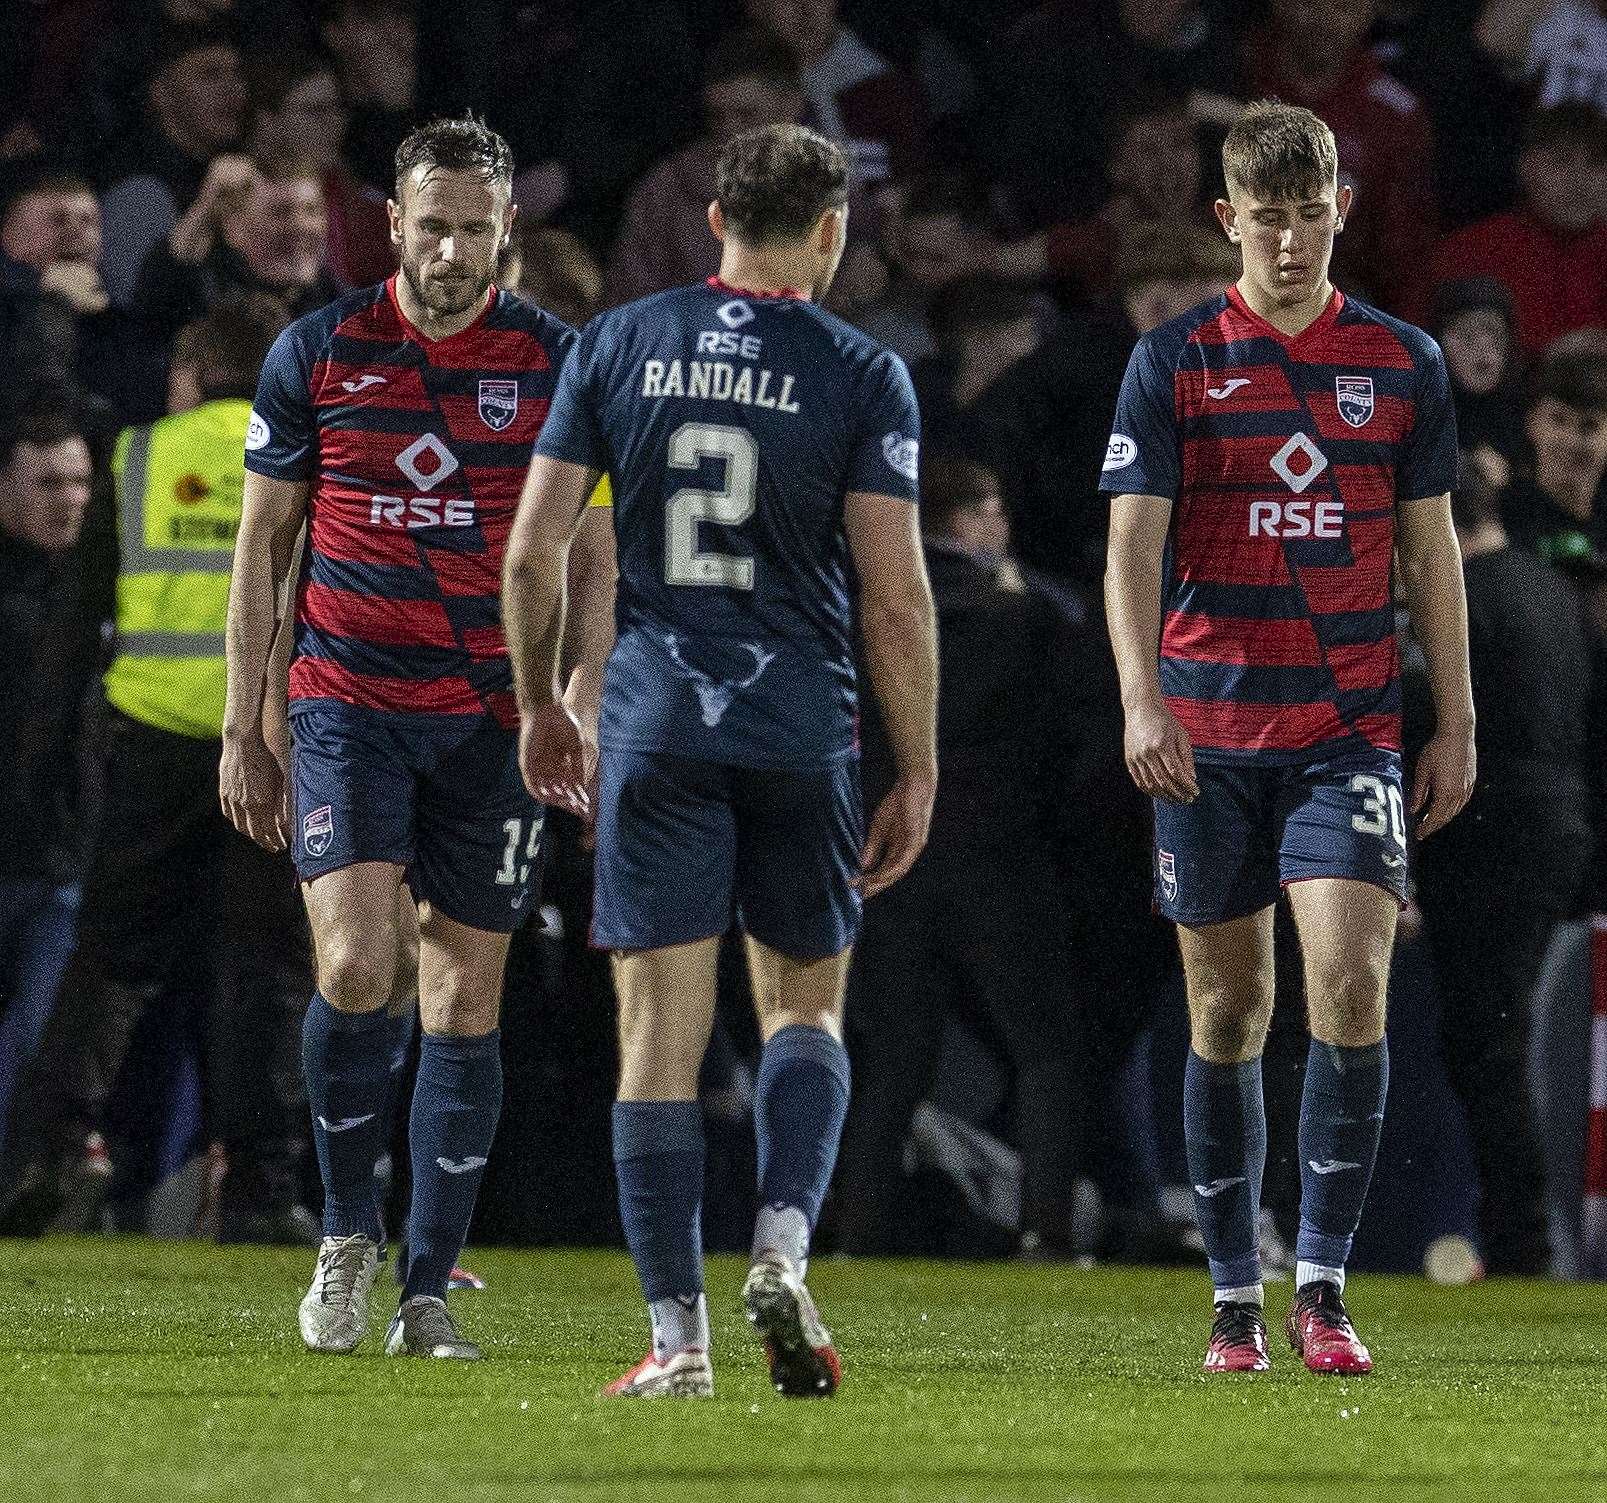 Ross County lost 6-1 at Hearts.